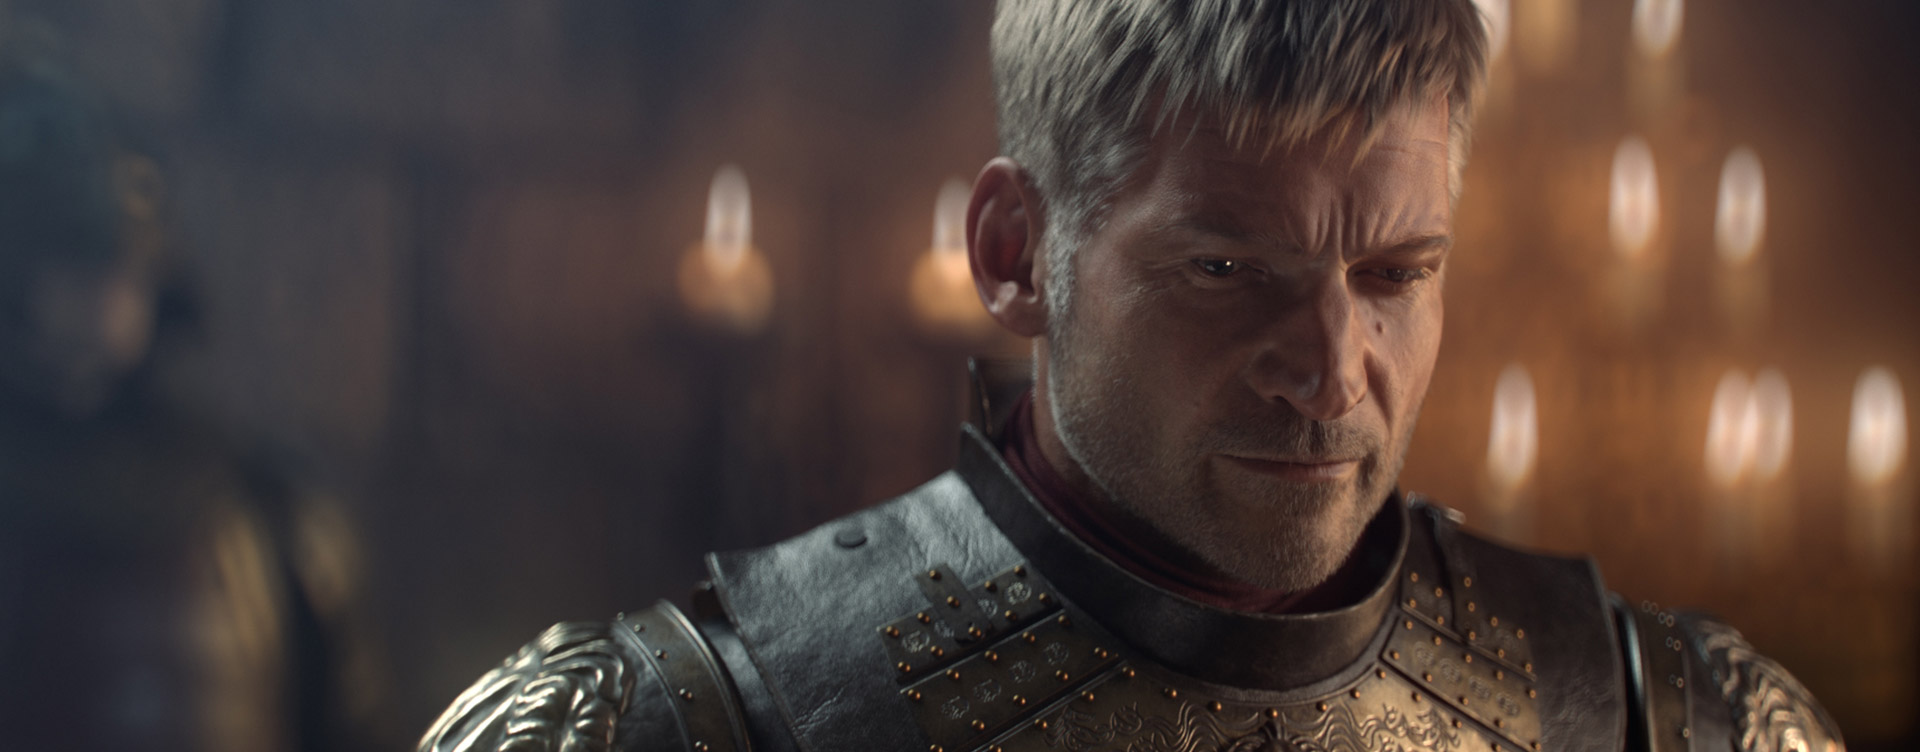 The Battle To Bring Game Of Thrones To Life In A Gaming Universe Foundry